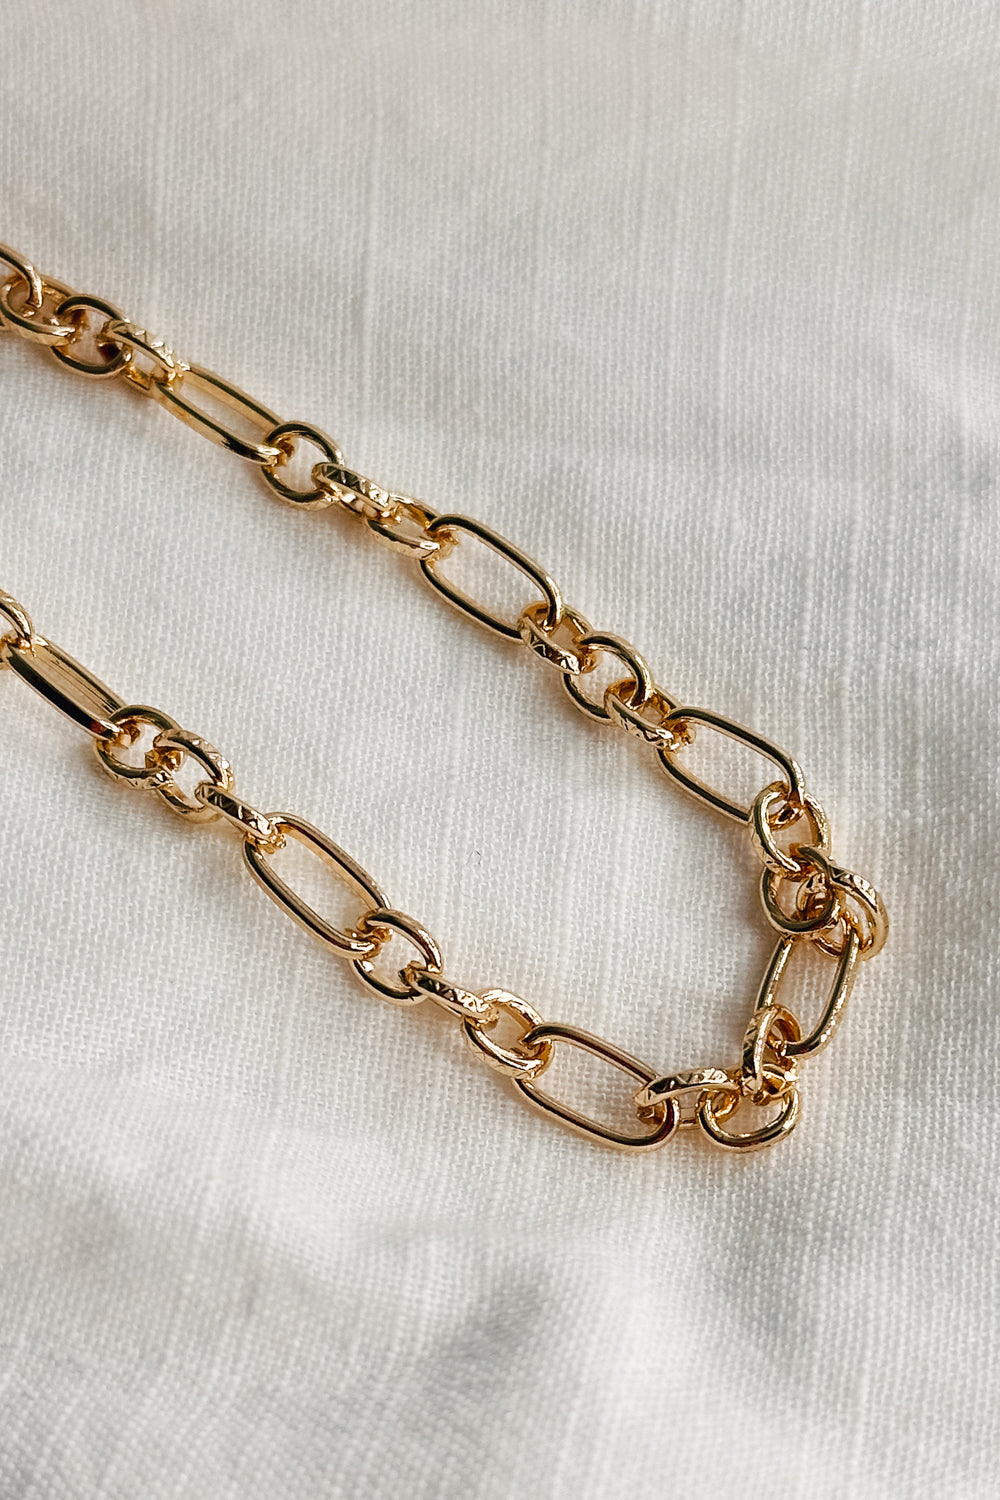 Image shows a close-up of the Reagan Gold Chain Link Bracelet against a white background. Bracelet has gold circle and oval links.